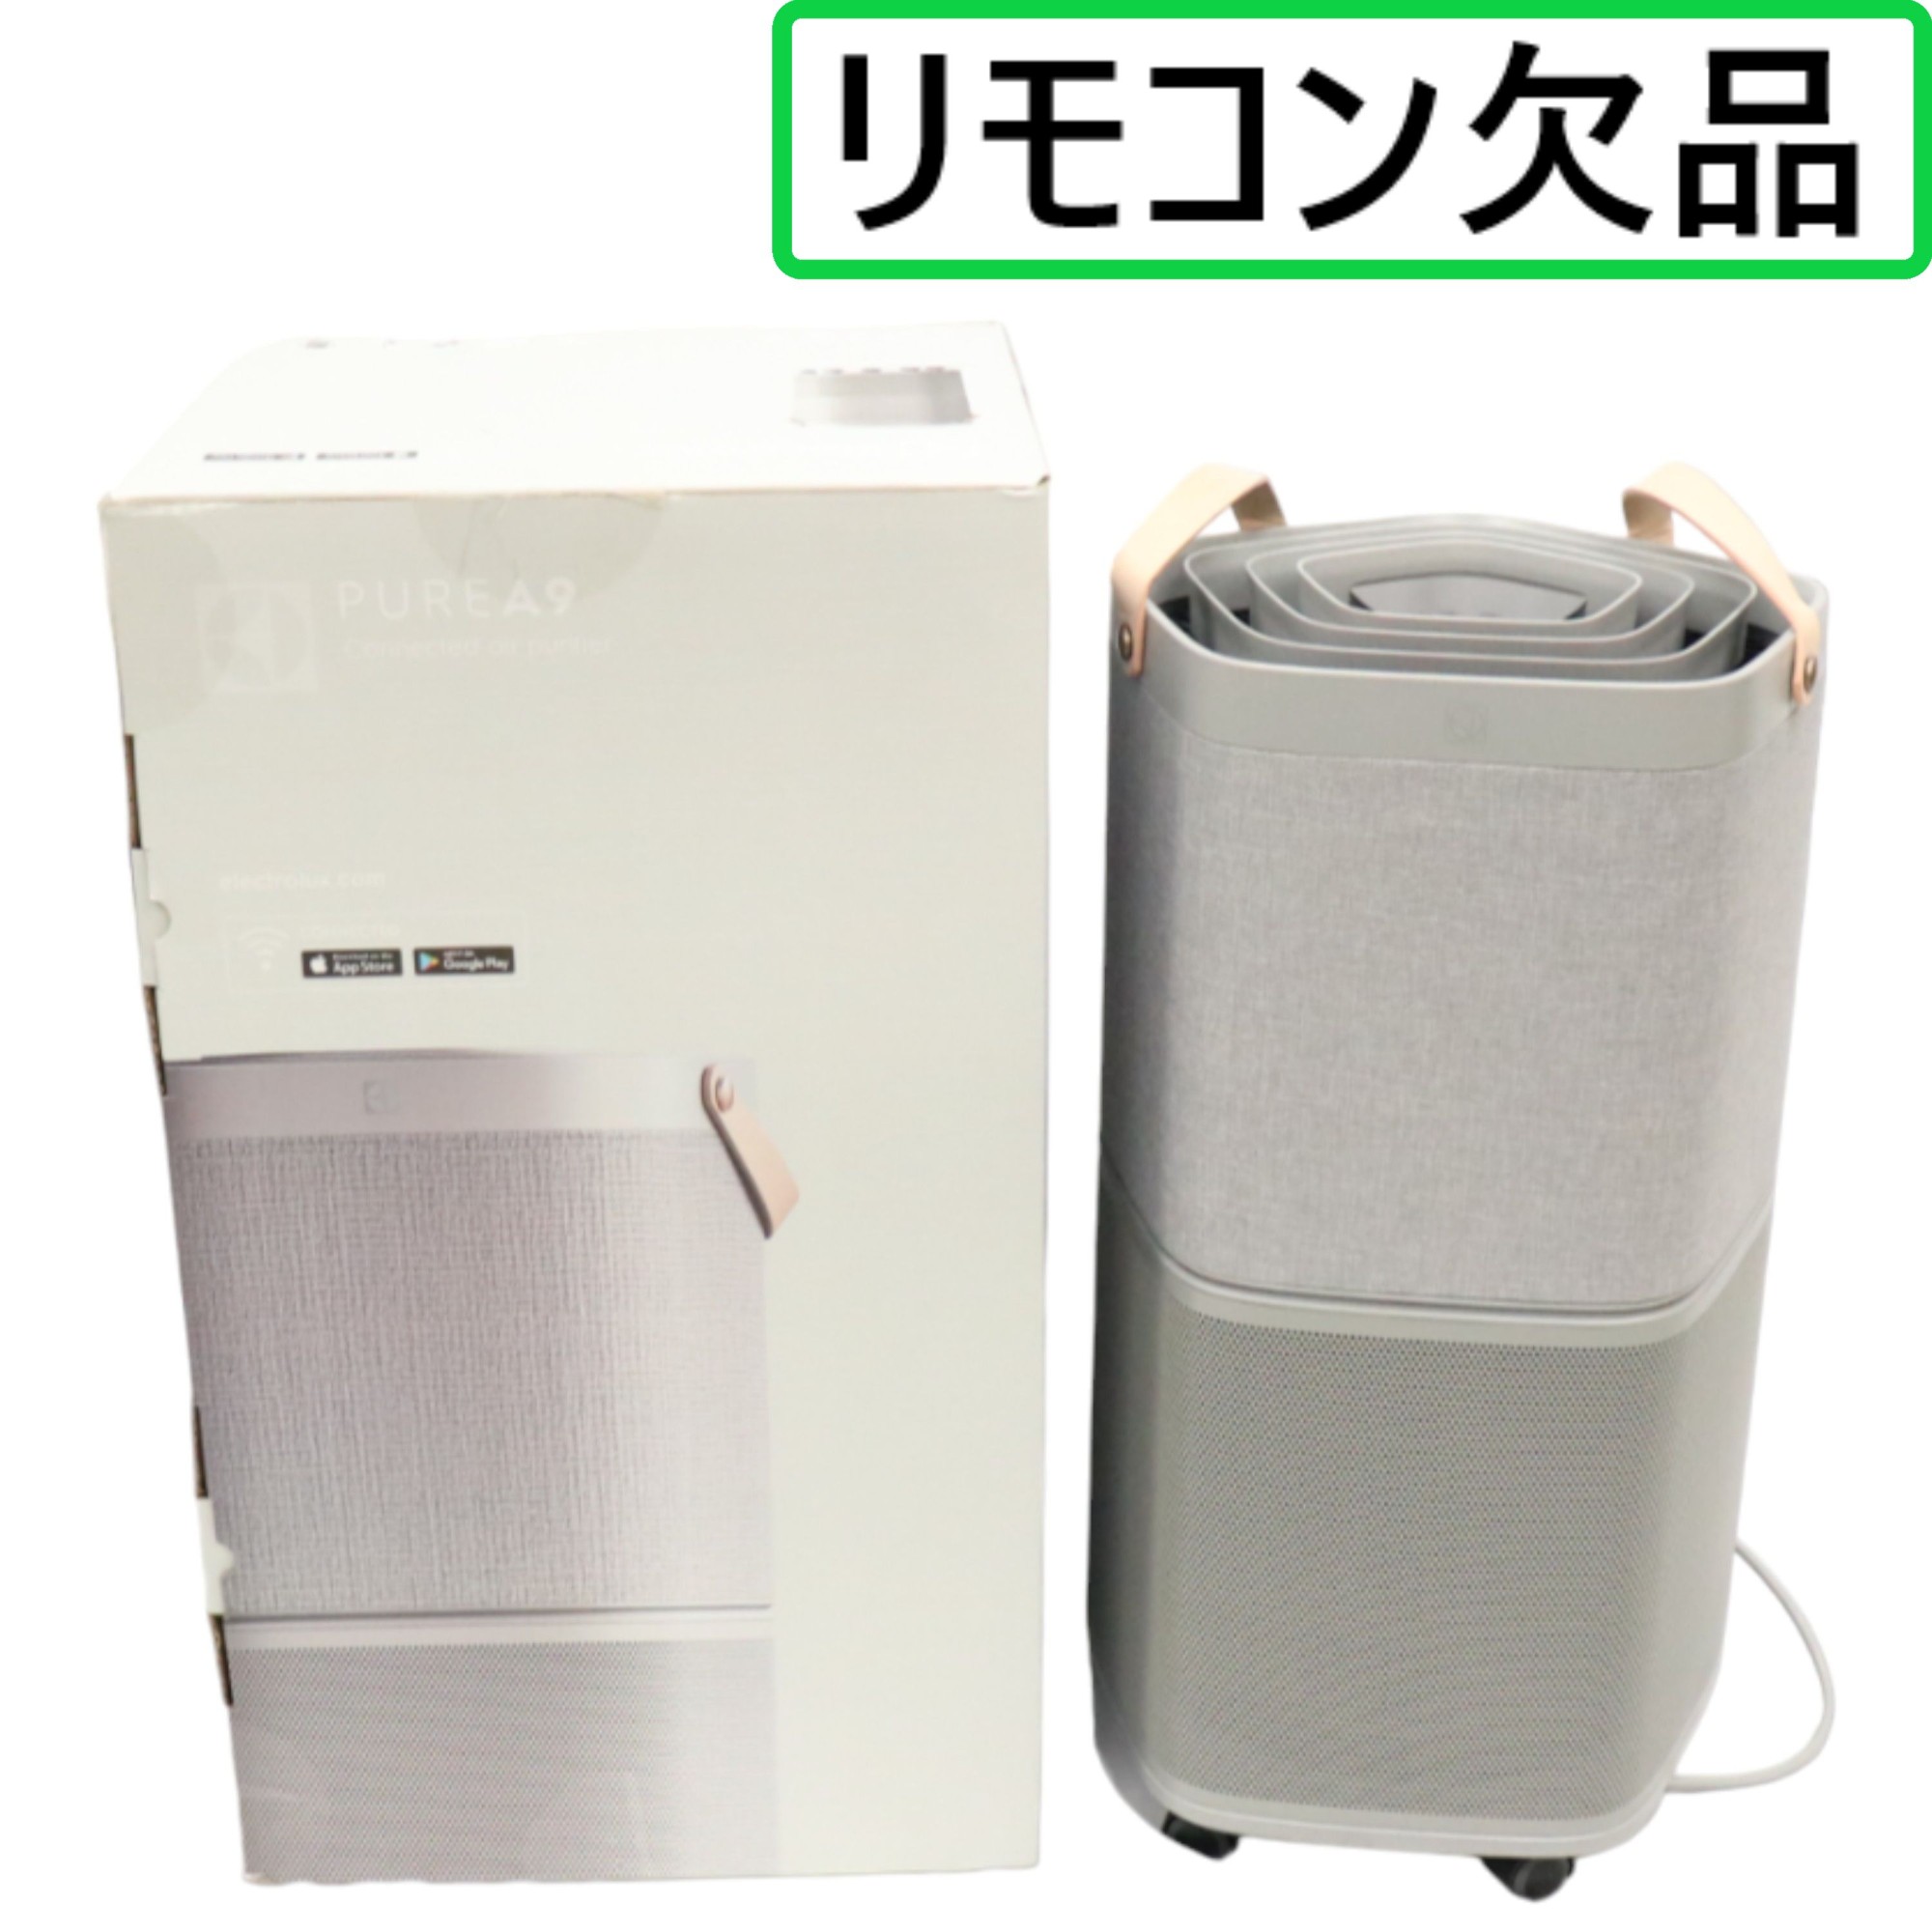  Electrolux(エレクトロラックス) 空気清浄機 Pure A9 PA91-406GY (〜約37畳） 